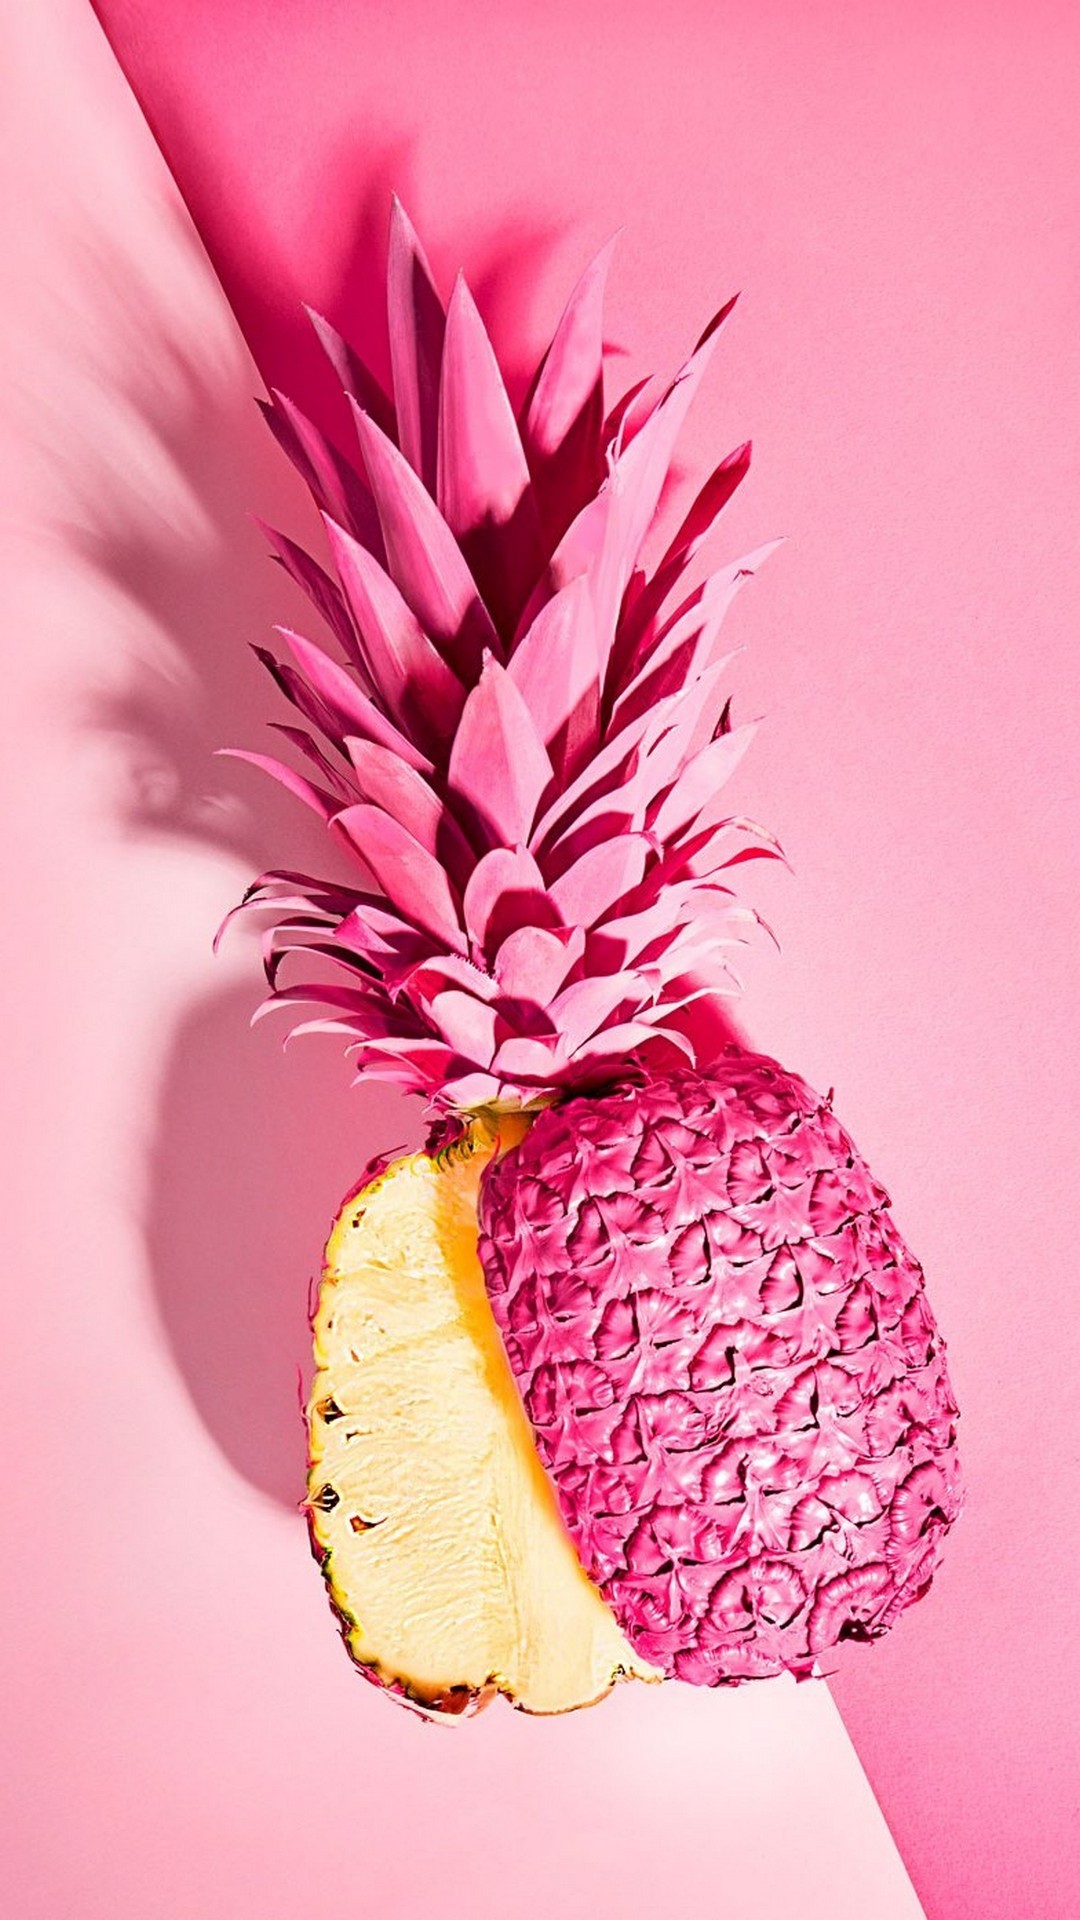 Best Pink Pineapple Wallpaper iPhone Android